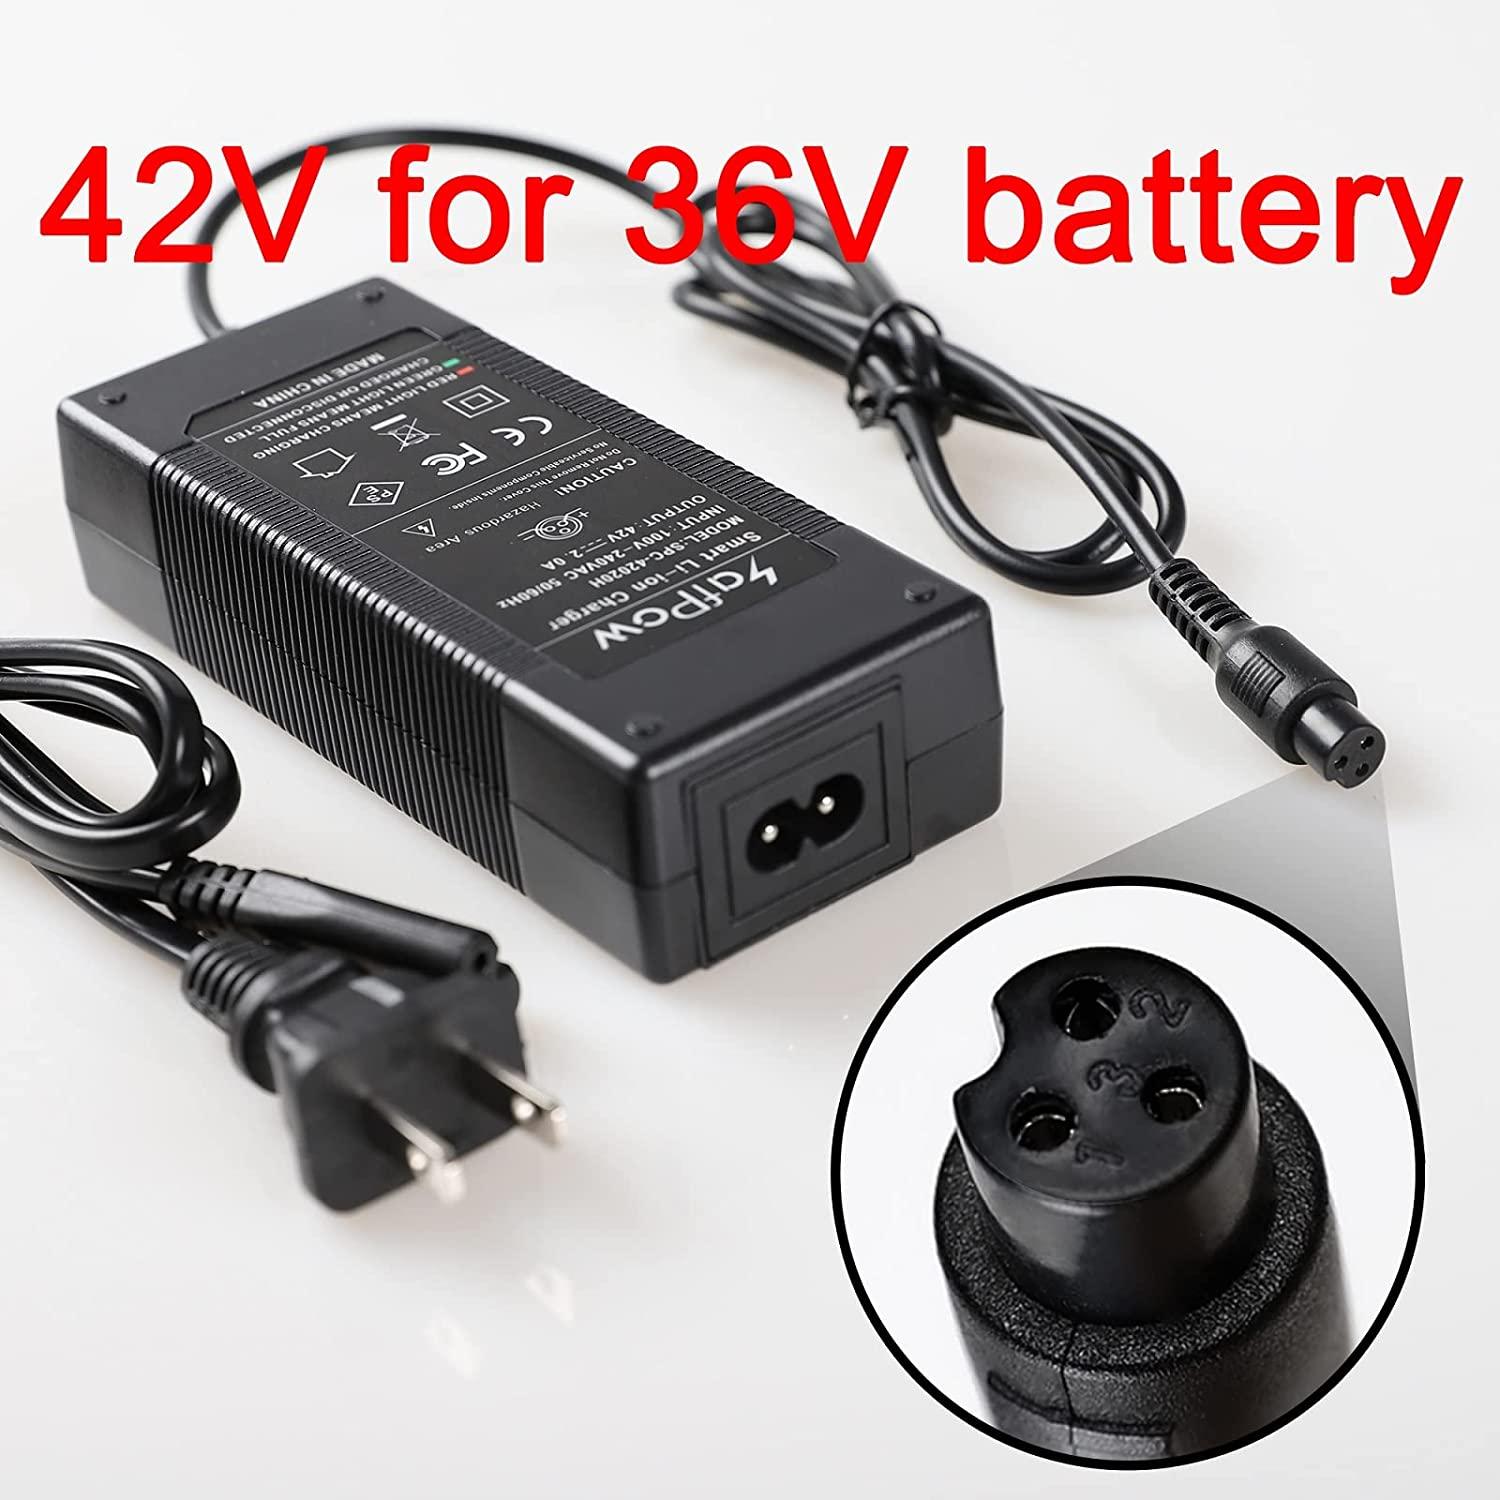 SafPow 42V 2A Battery Charger 3 Prong Universal Replacer for 36V